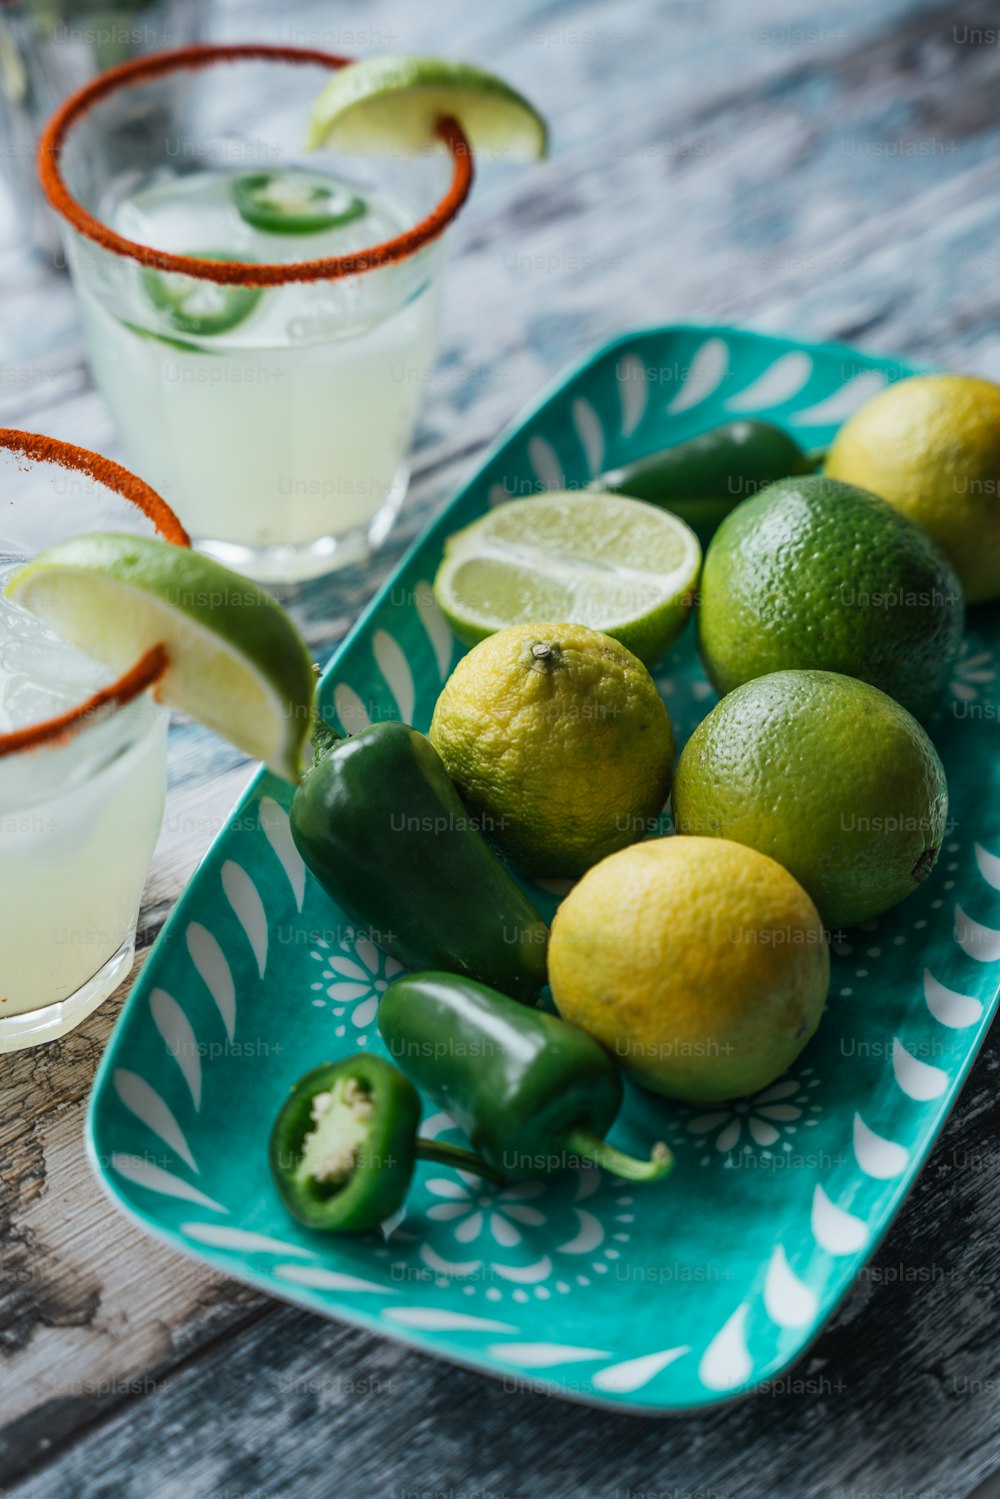 a plate of limes, peppers, and limeade on a table